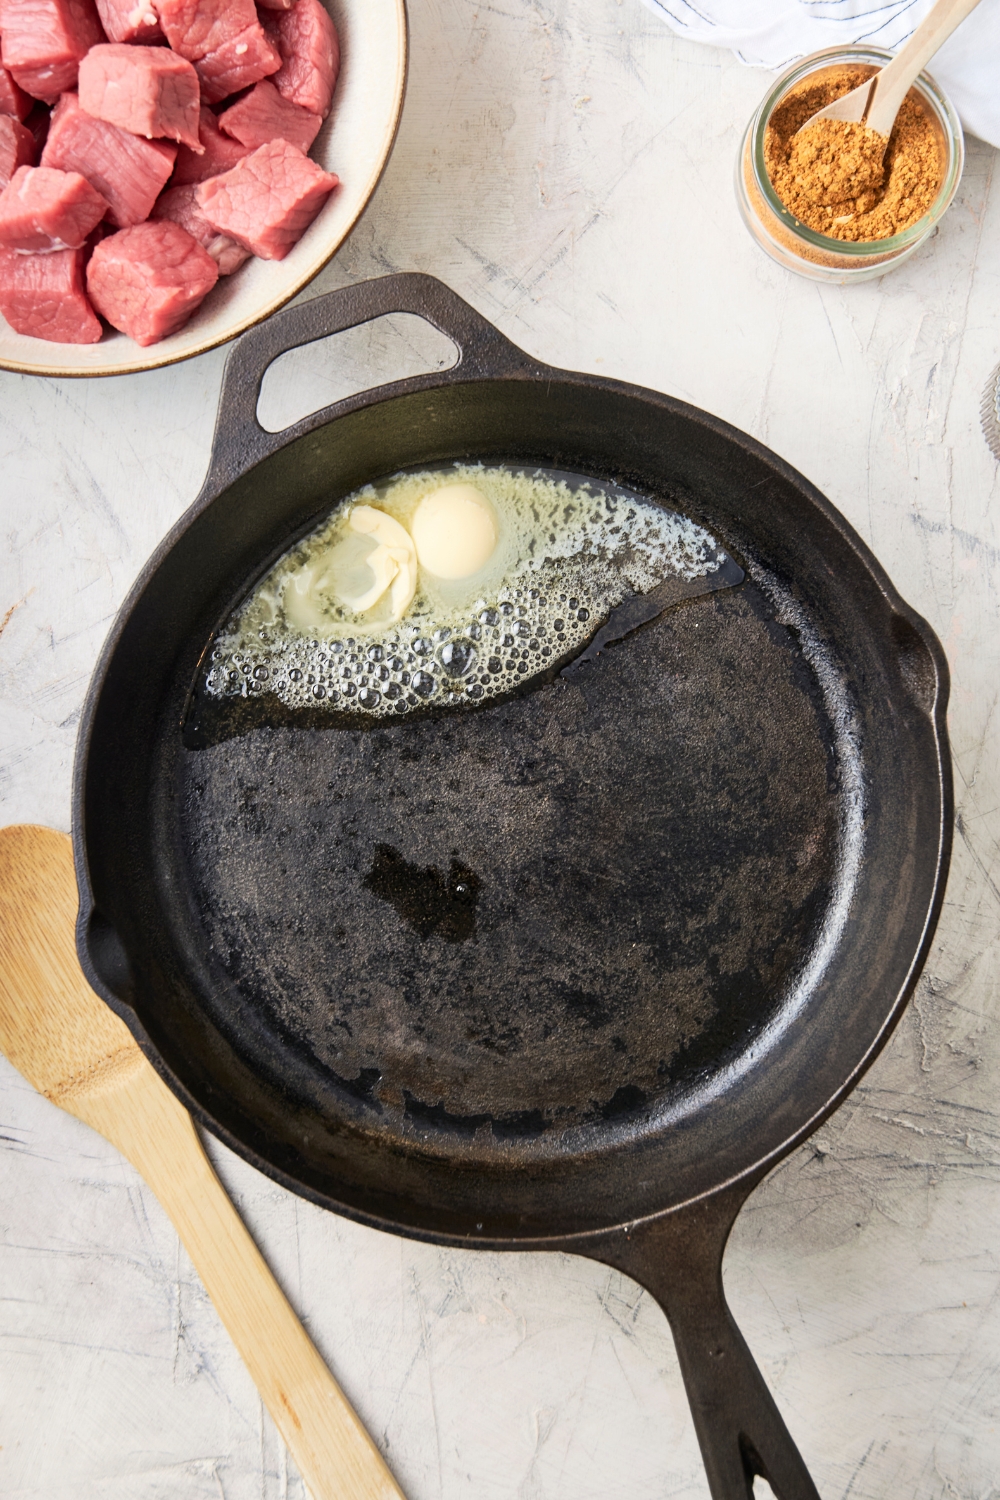 Butter begins to melt in a cast iron skillet. A wooden spoon, seasonings, and raw beef are near by.